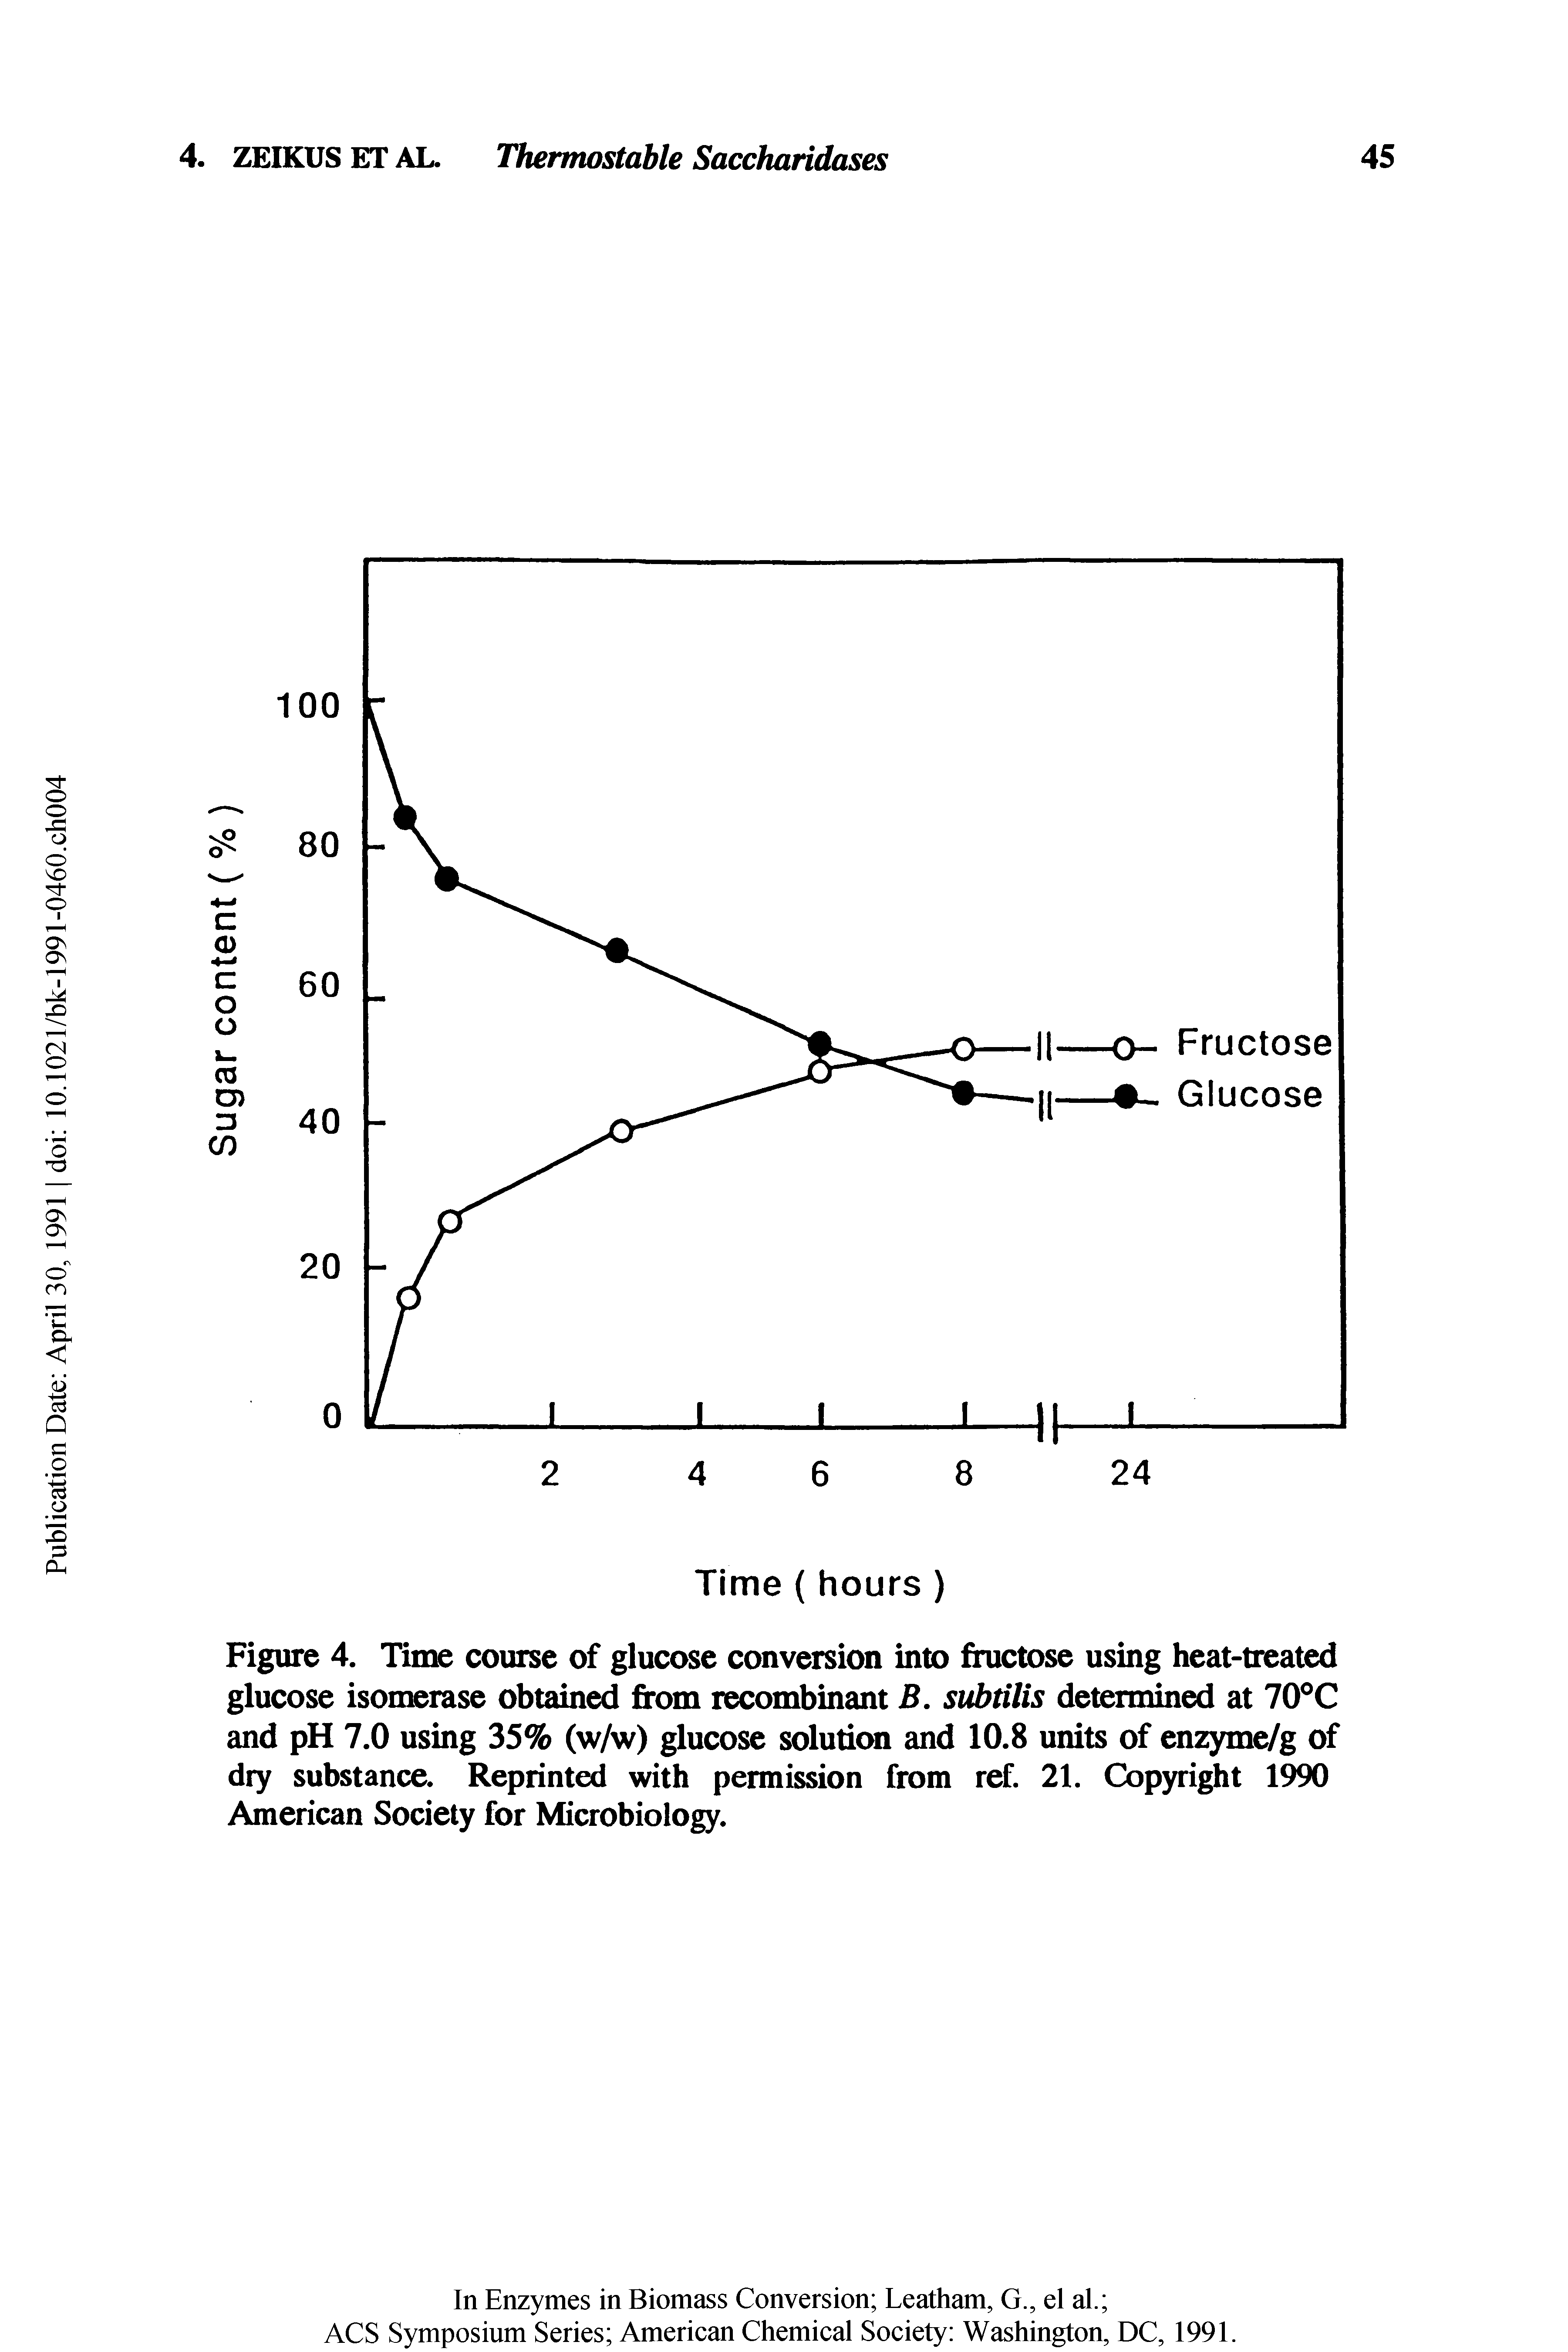 Figure 4. Time course of glucose conversion into fructose using heat-treated glucose isomerase obtained from recombinant B. subtilis determined at 70 C and pH 7.0 using 35% (w/w) glucose solution and 10.8 units of enzyme/g of dry substance. Reprinted with permission from ref. 21. Copyright 1990 American Society for Microbiology.